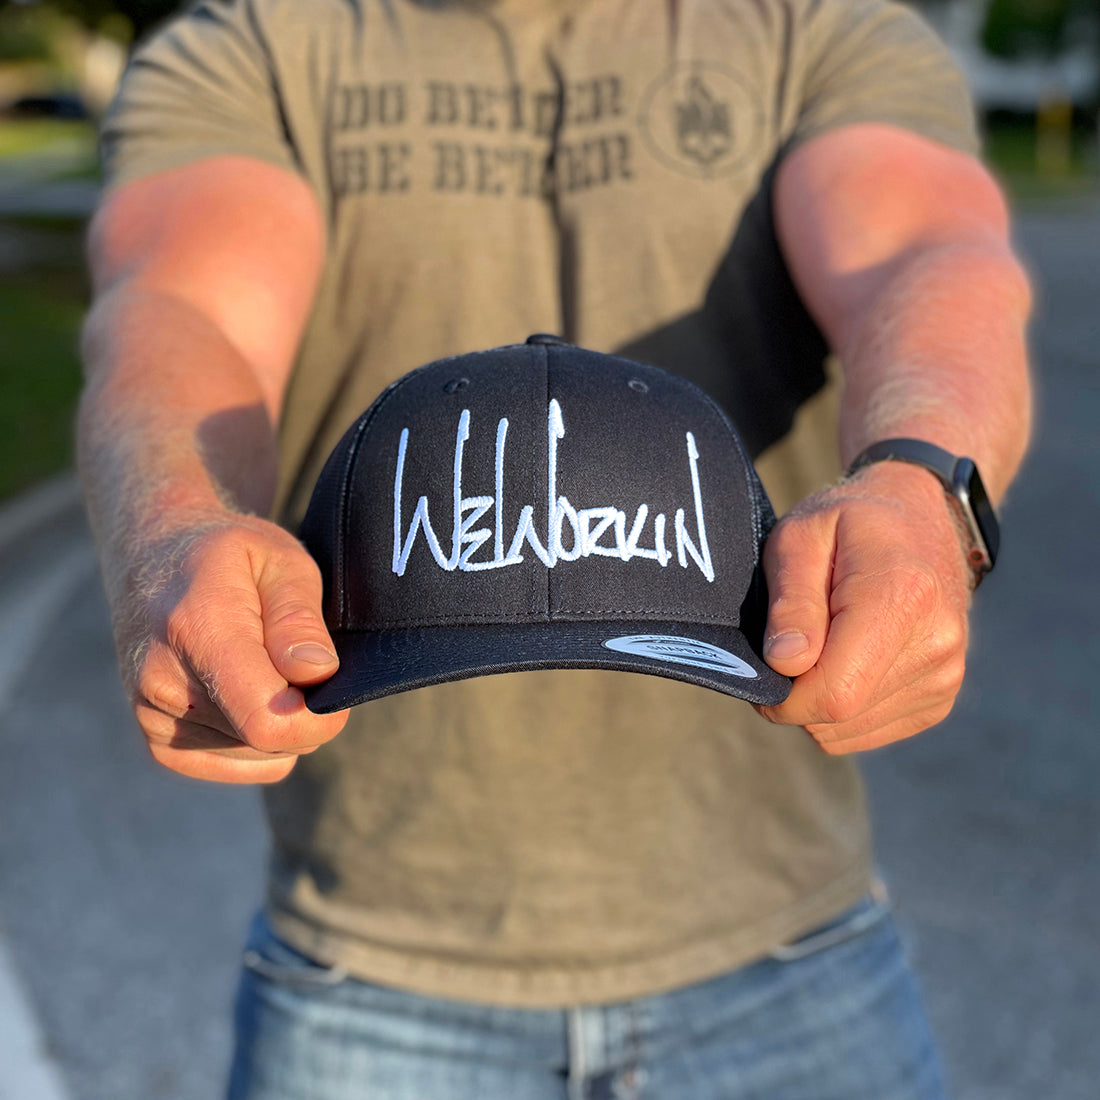 Man holding a WeWorkin Retro Trucker Hat in stealth black color (all panels in black). WeWorkin script logo is embroidered large on the front Black panels in White thread.